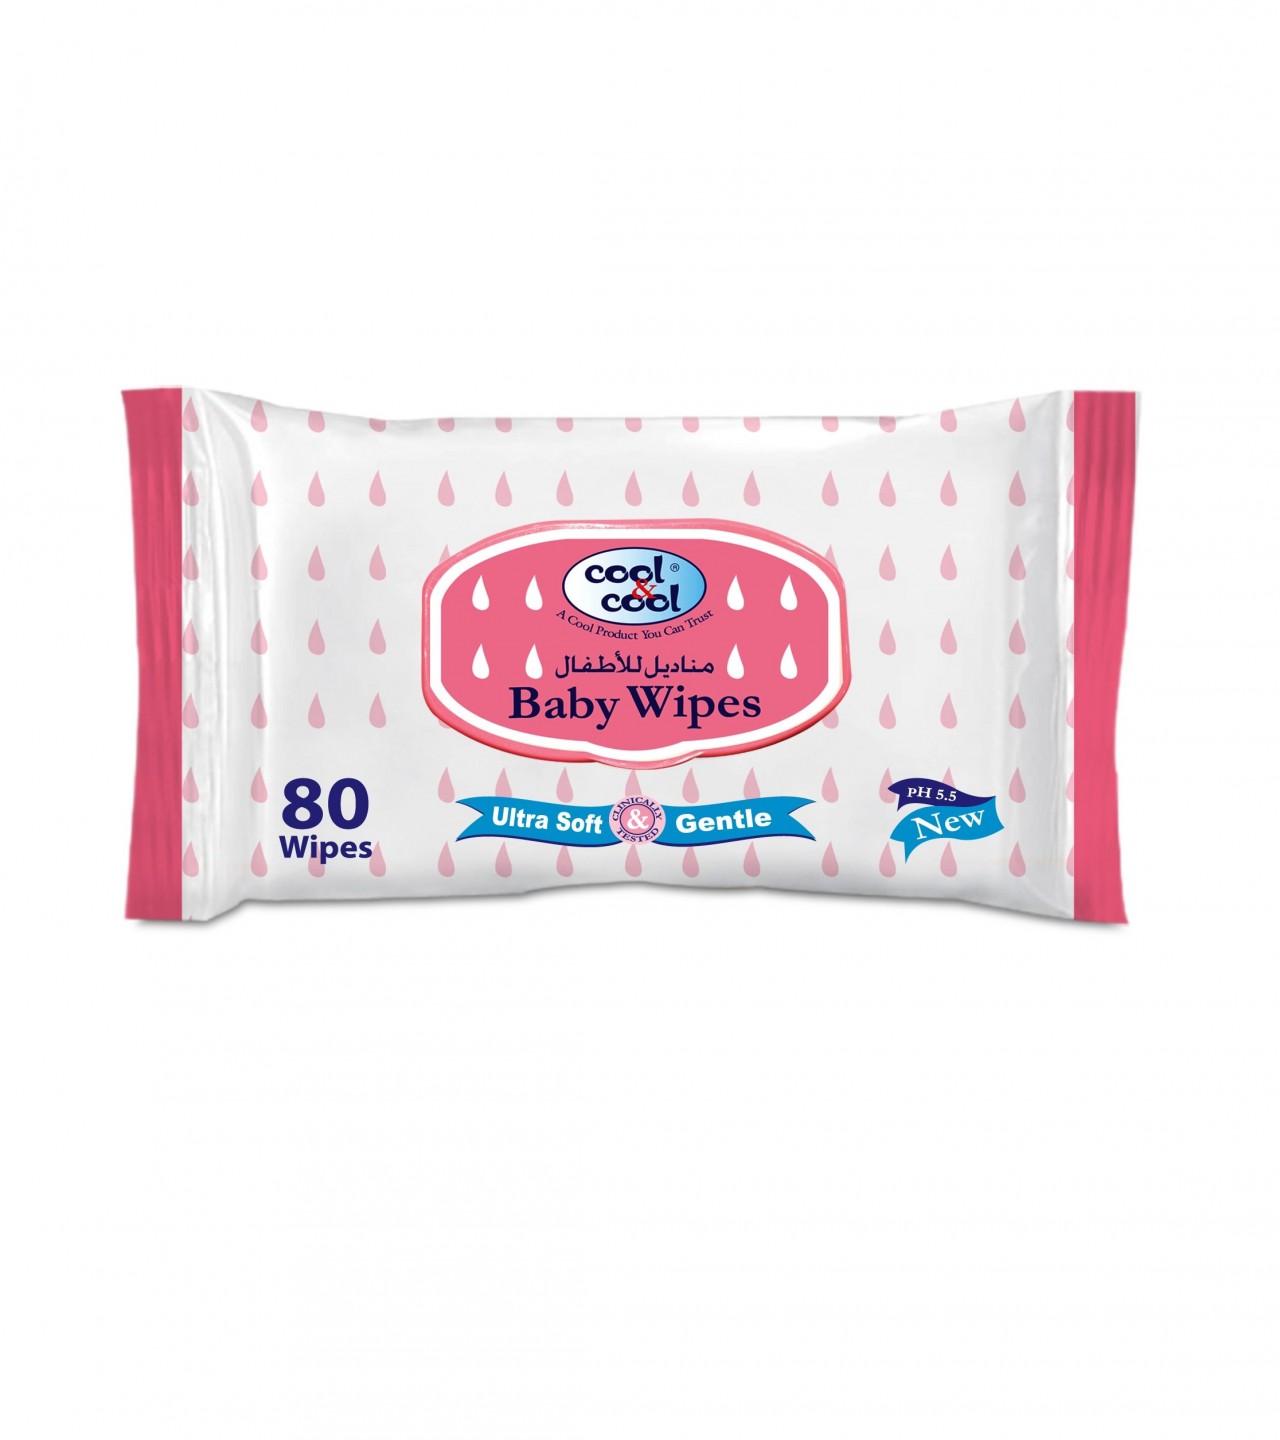 Baby Wipes 80's Diapers